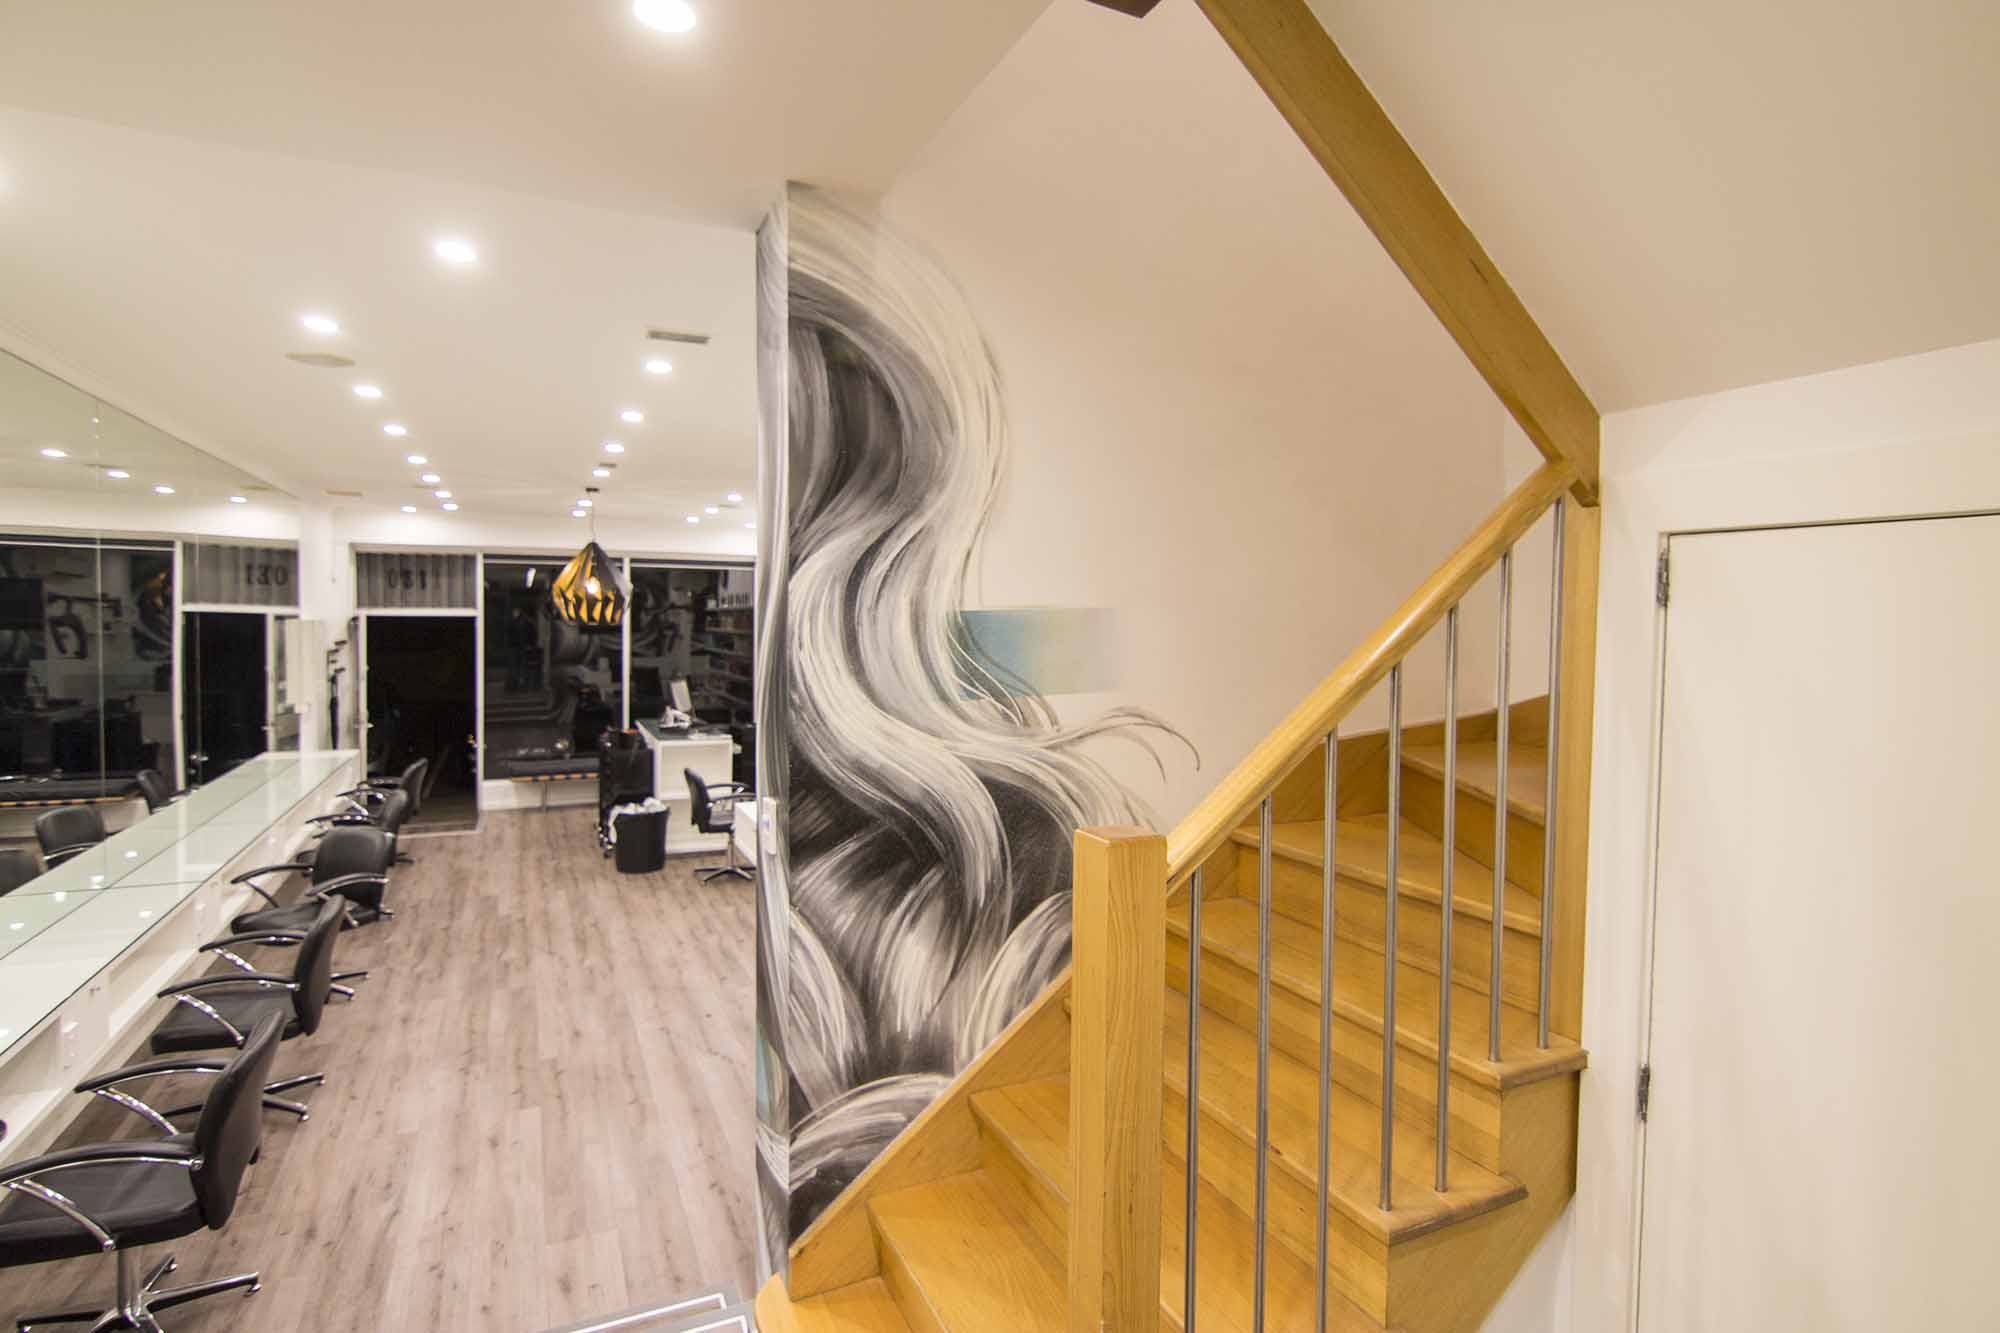 Interior of hair salon decorated with wall mural featuring textured strands of hair.